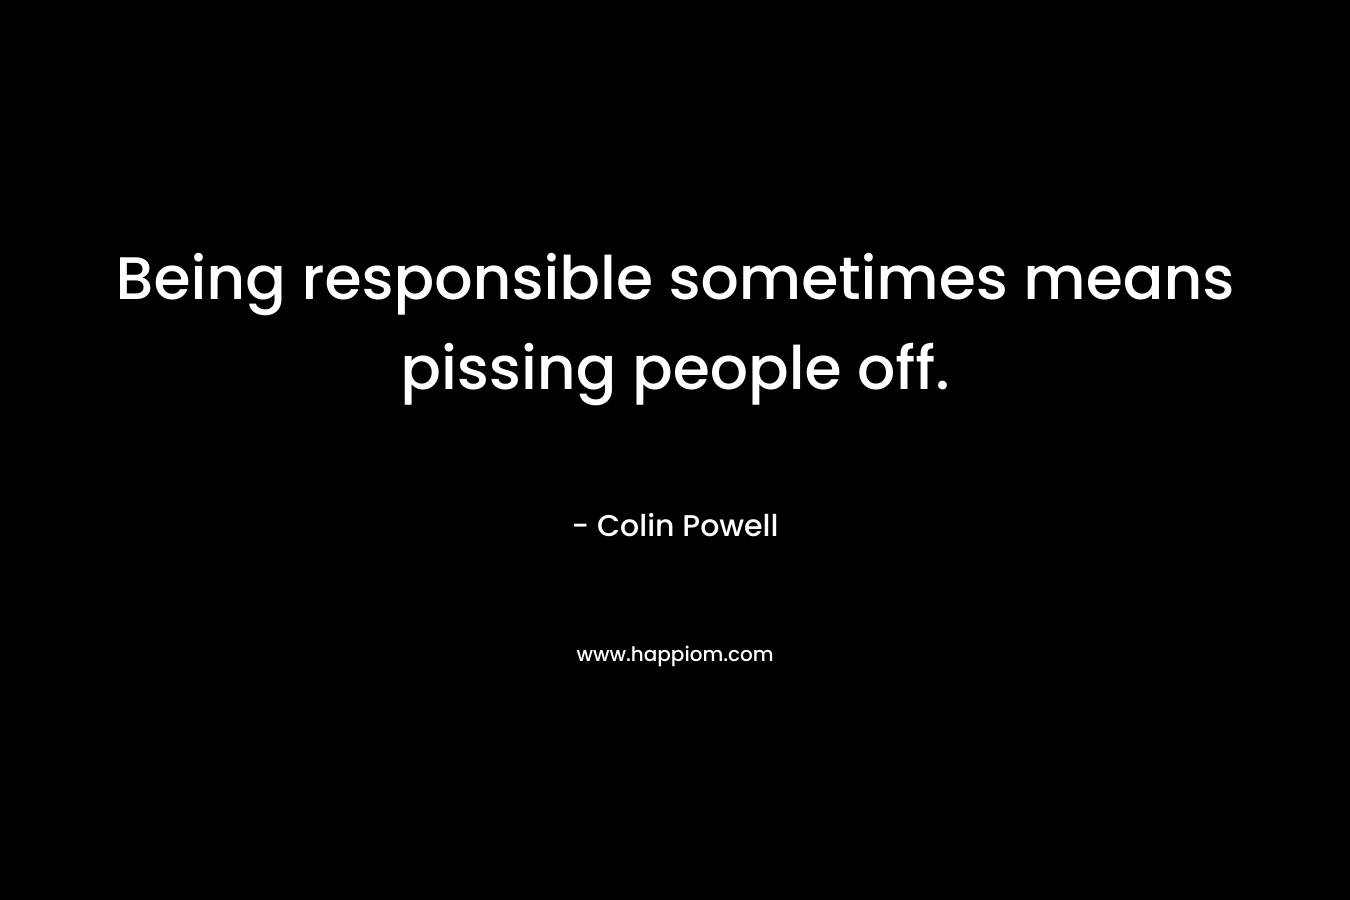 Being responsible sometimes means pissing people off. – Colin Powell